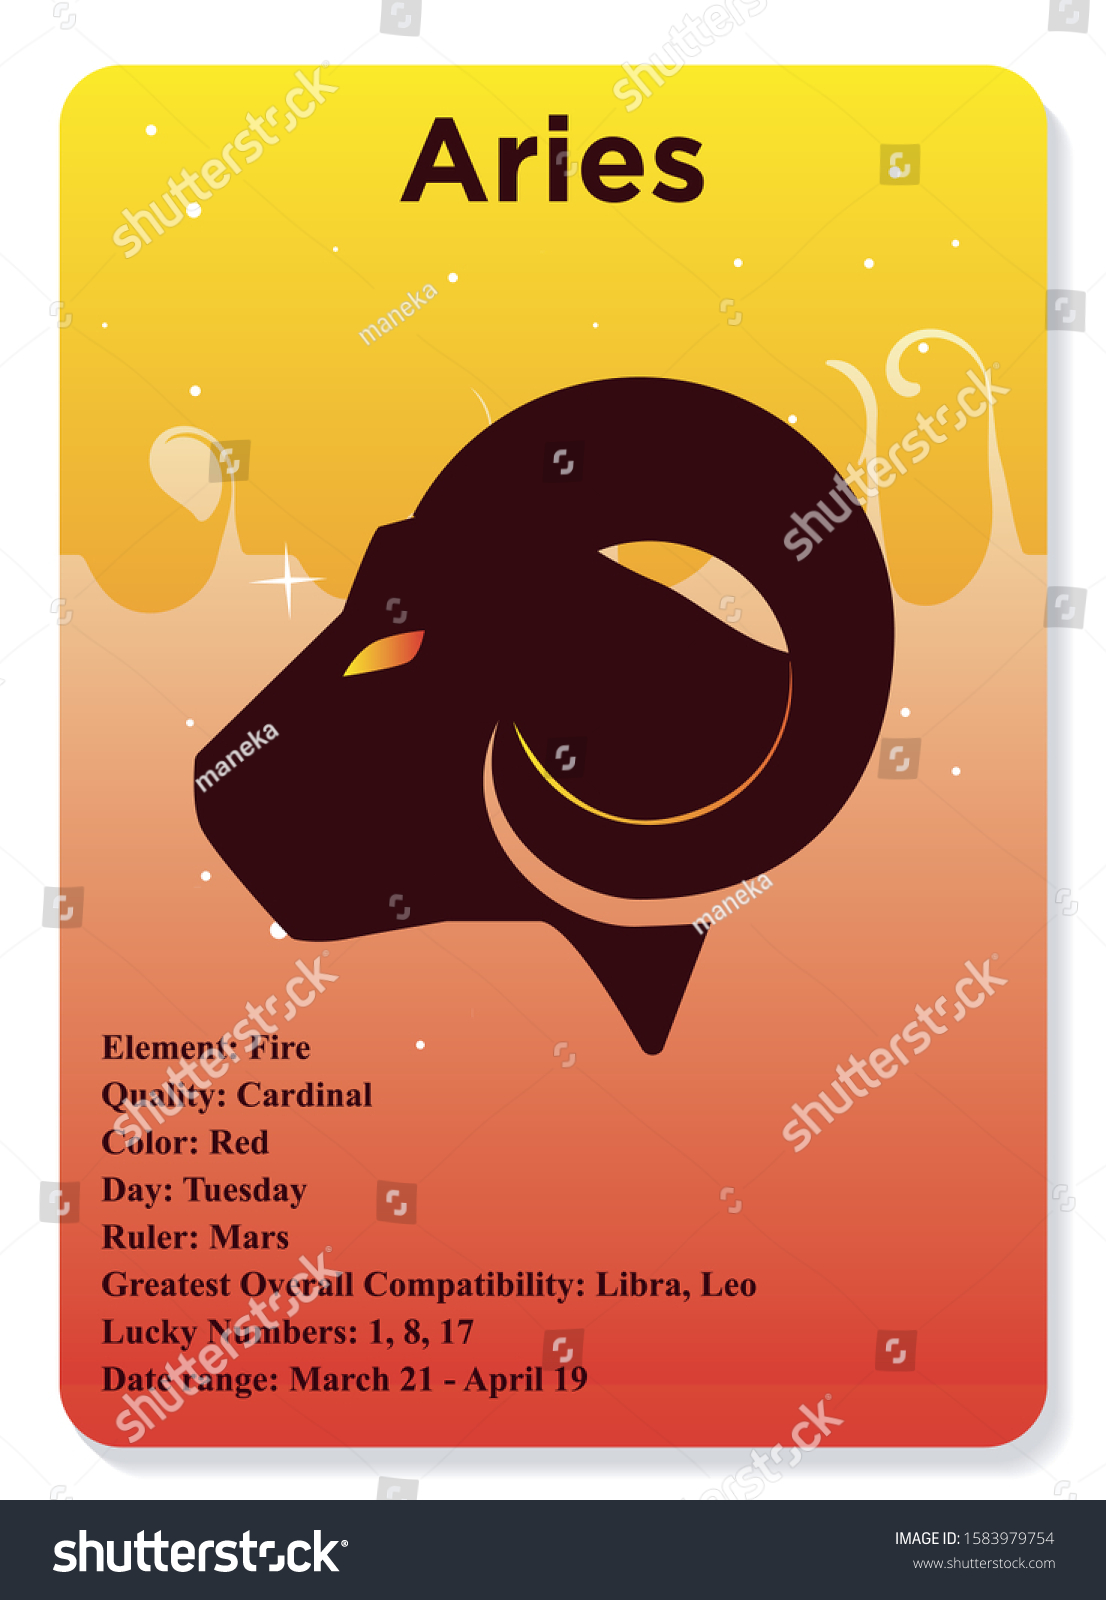 Aries Zodiac Sign Horoscope Flat Style Stock Vector Royalty Free 1583979754 Leo lucky numbers for february: https www shutterstock com image vector aries zodiac sign horoscope flat style 1583979754